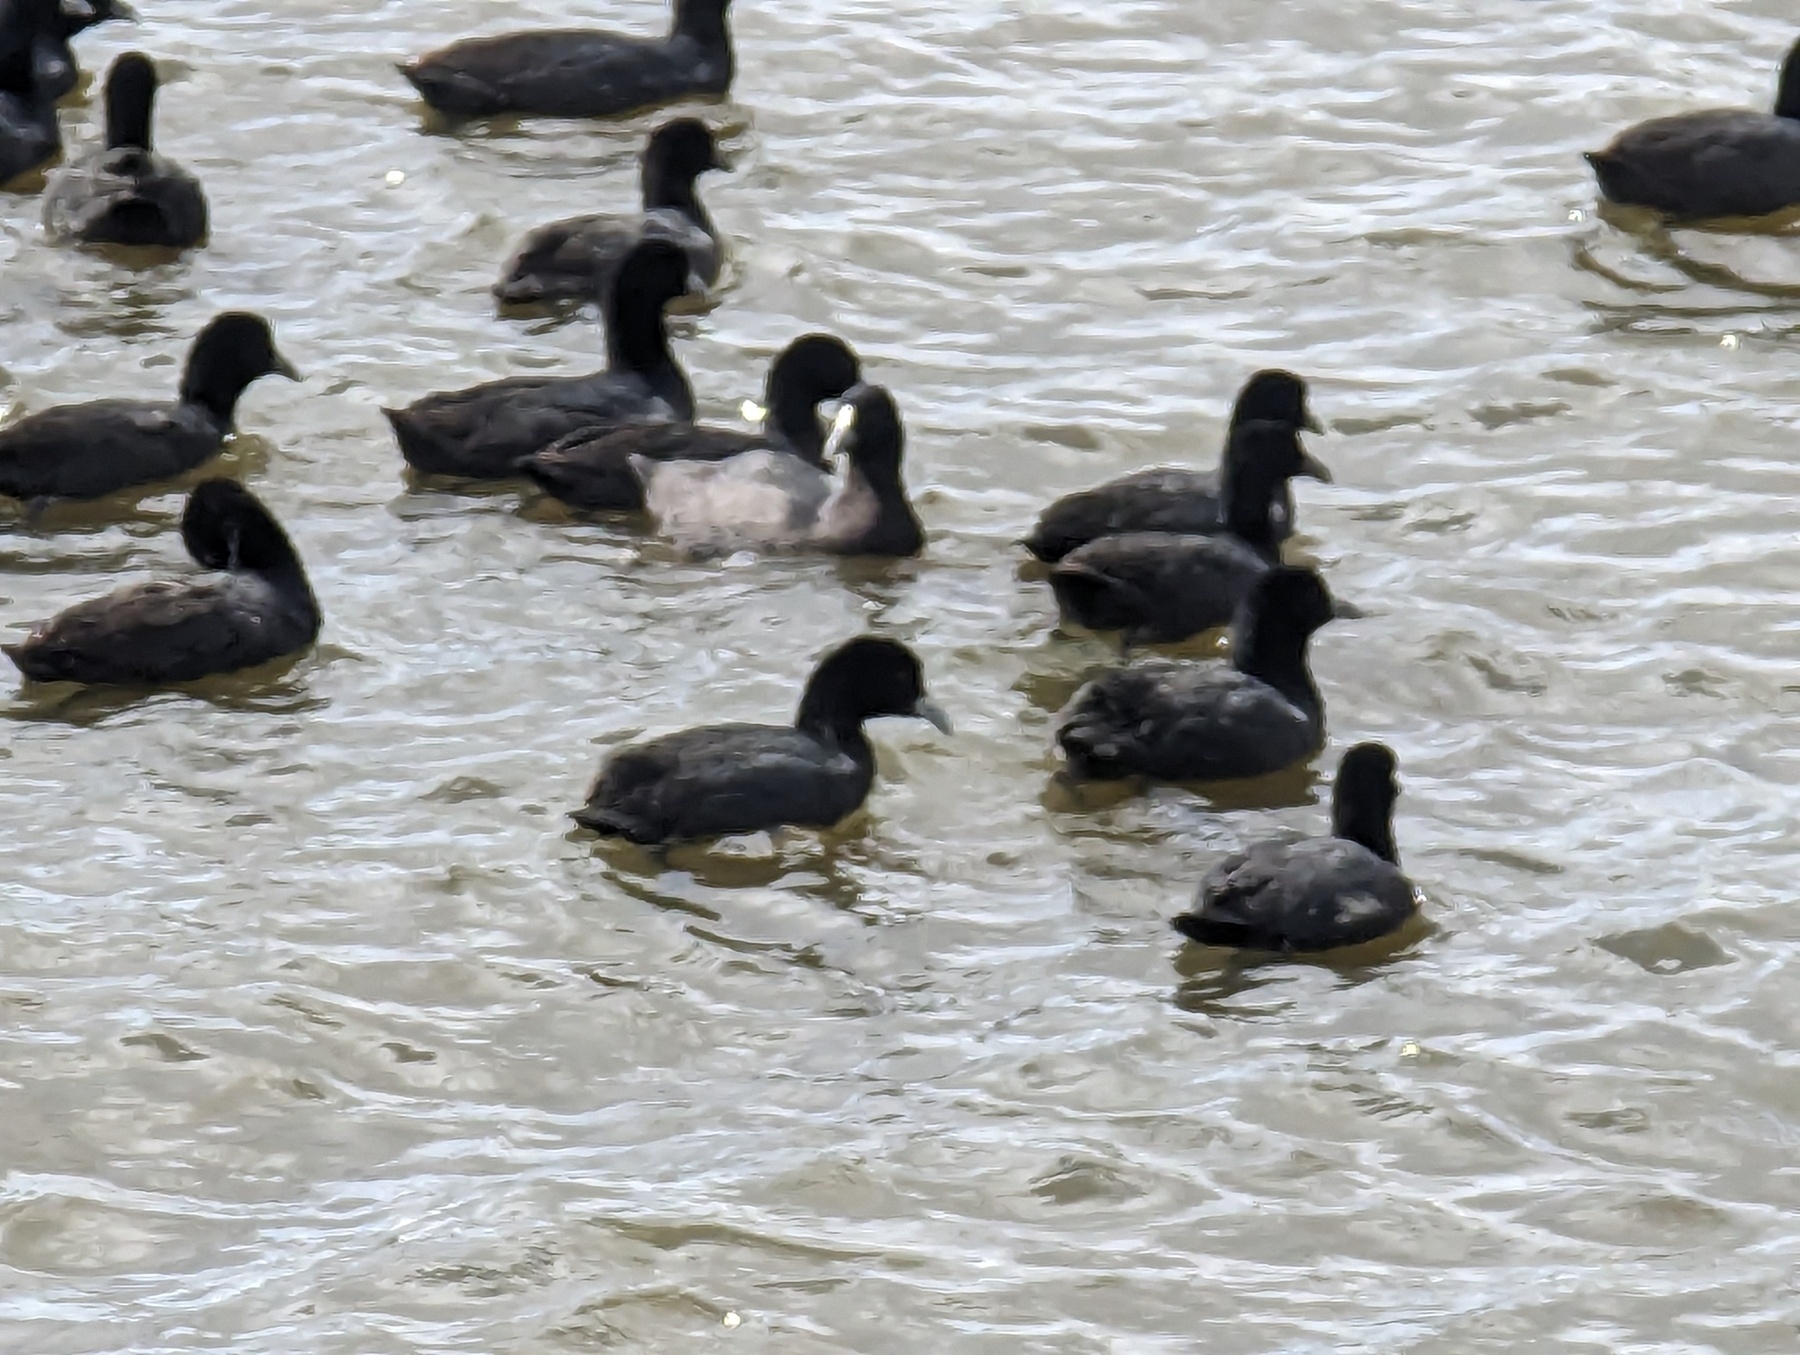 Close up of the Euroasian Coots.